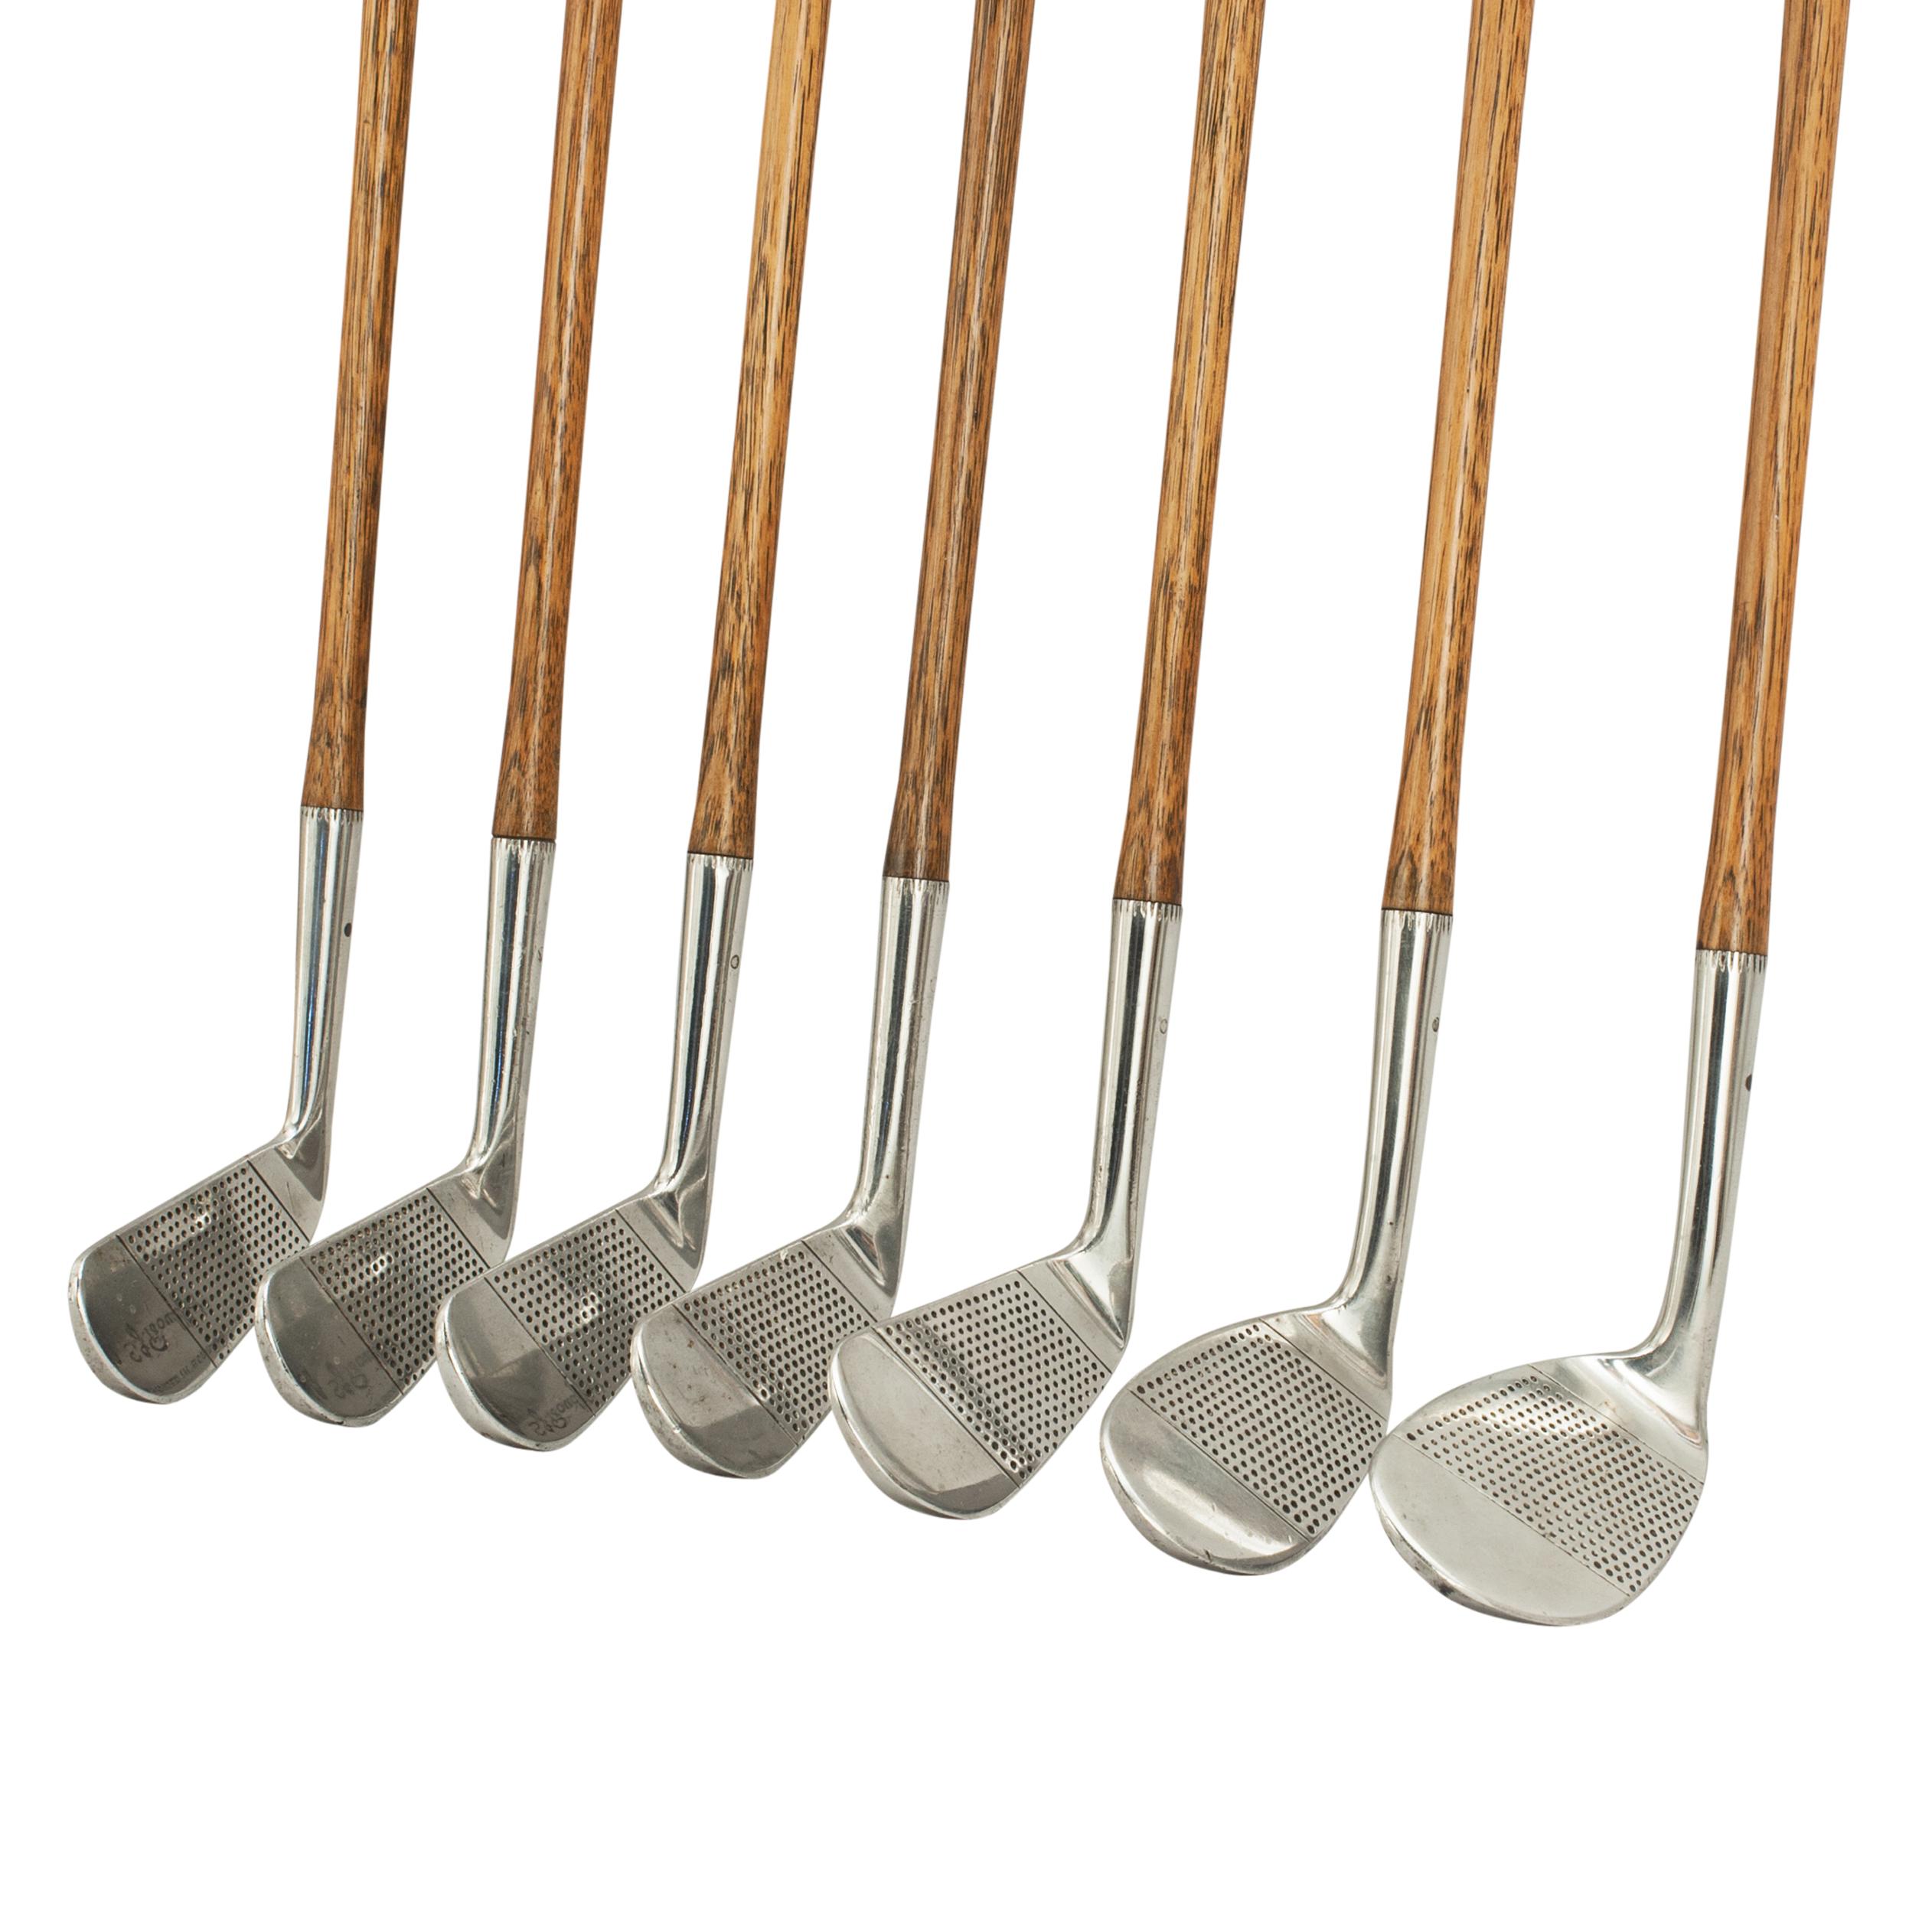 Set of seven playable Hickory golf clubs.
A very good set of seven hickory shafted irons by Nicoll of Leven. The set includes No.1, 2, 3, 4 iron, No.5 mashie, No.7 mashie-niblick & No.8 niblick. The club heads are all stamped with Nicoll's 'hand'